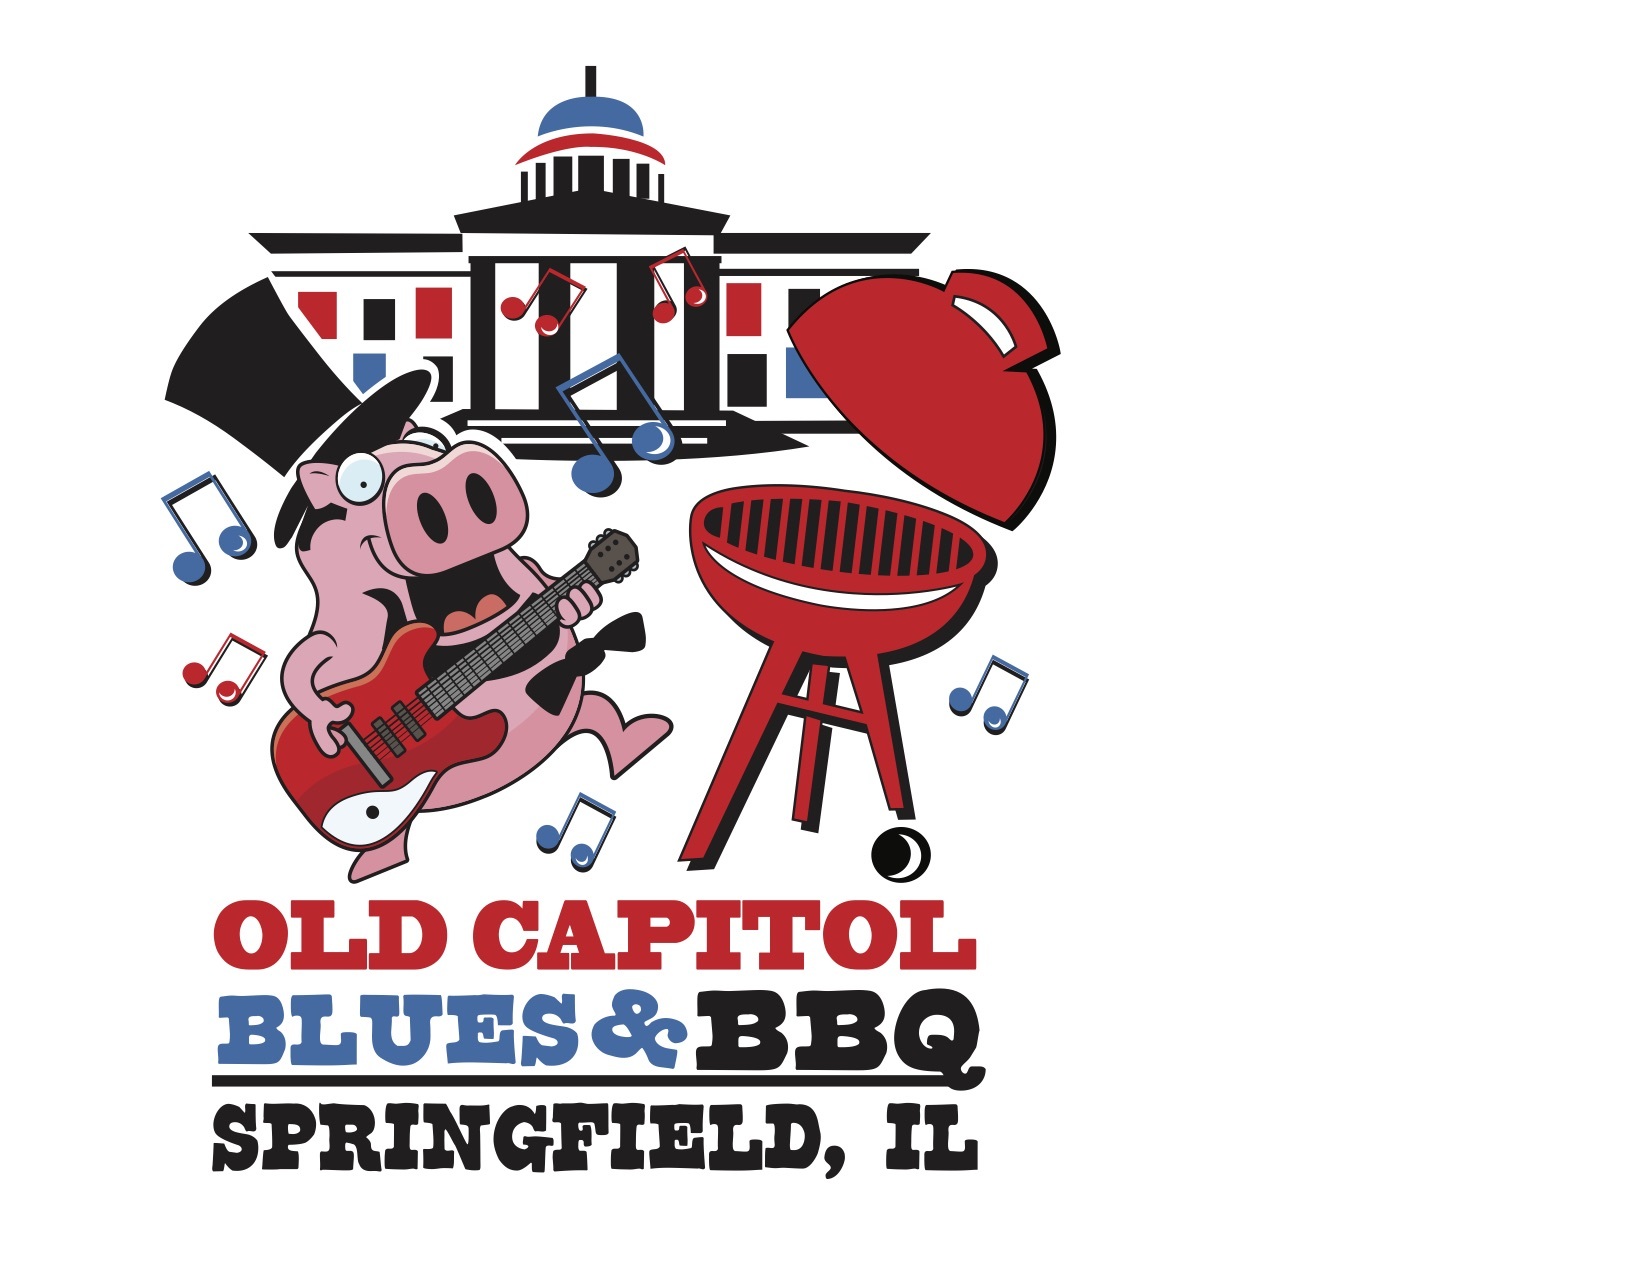 BHTM headed to Springfield, IL for Capitol Blues & BBQ! 